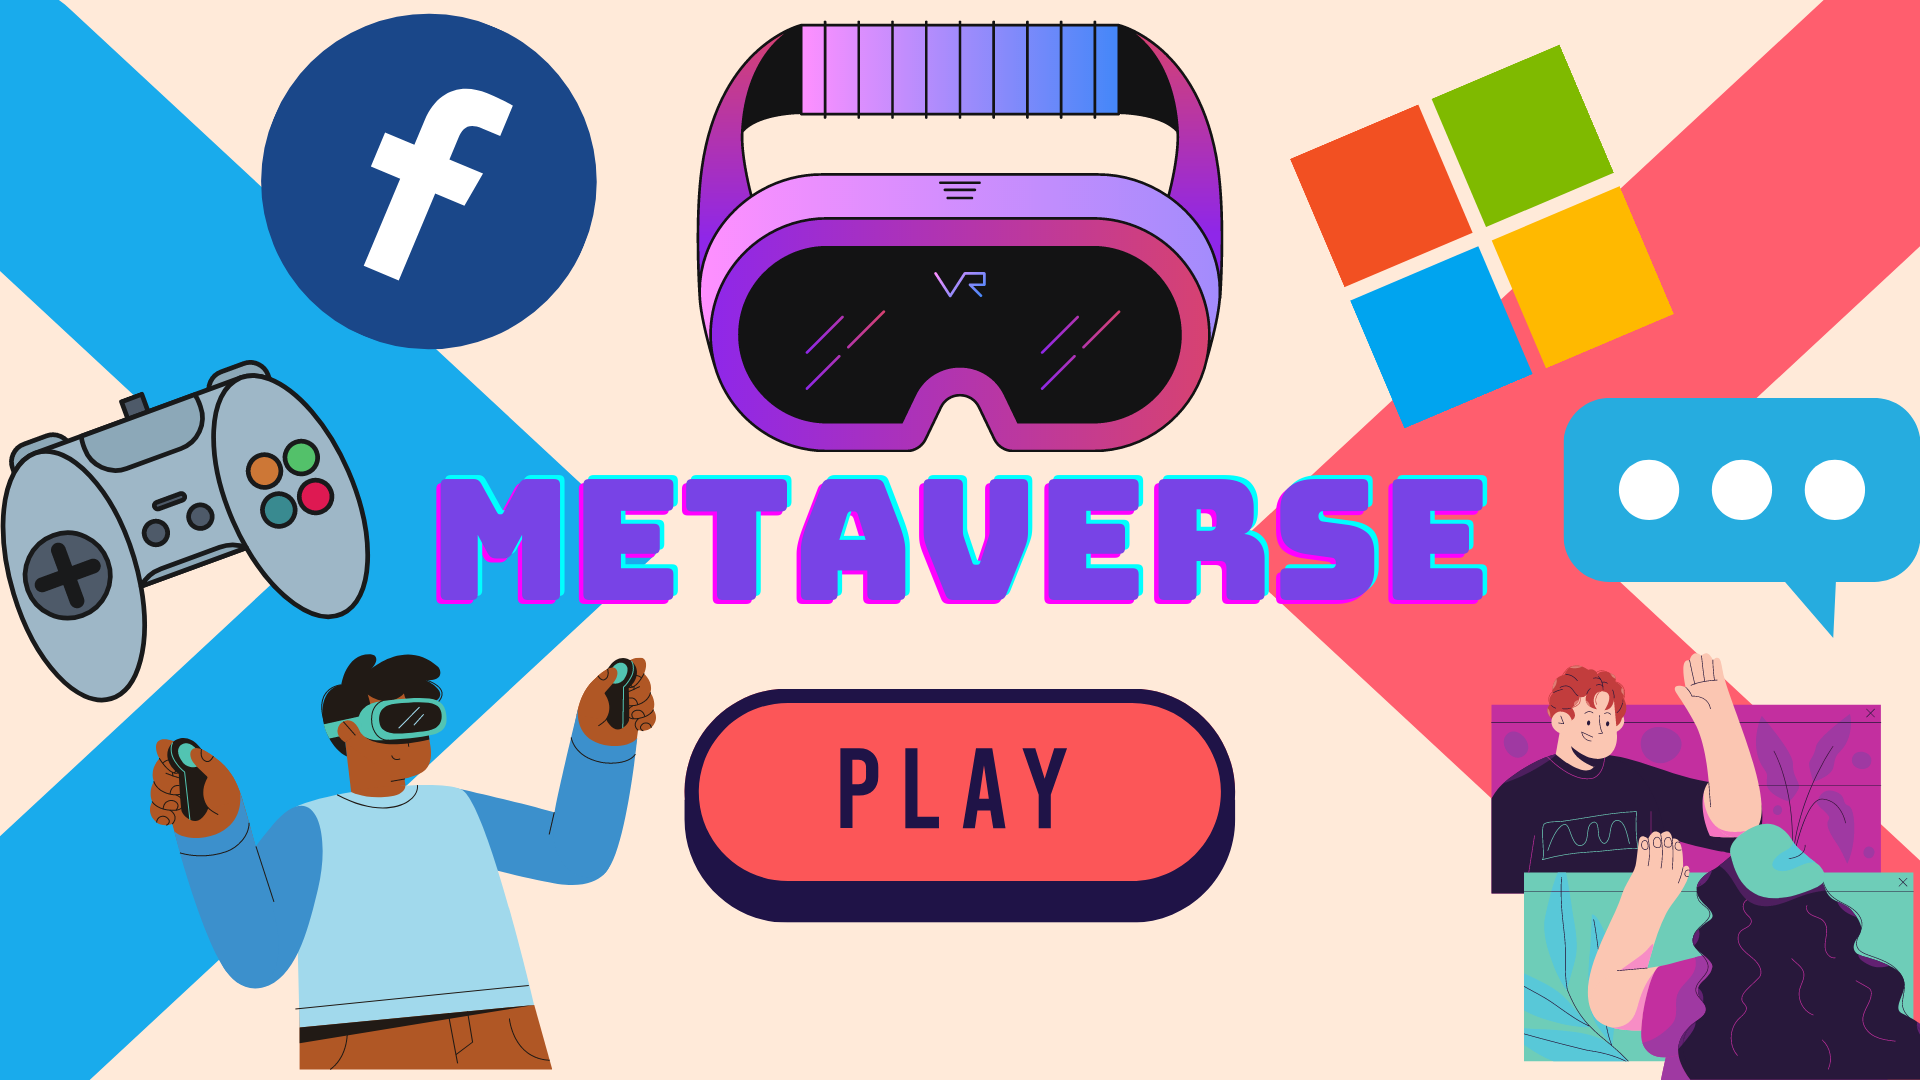 Metaverse: The future of the Internet 